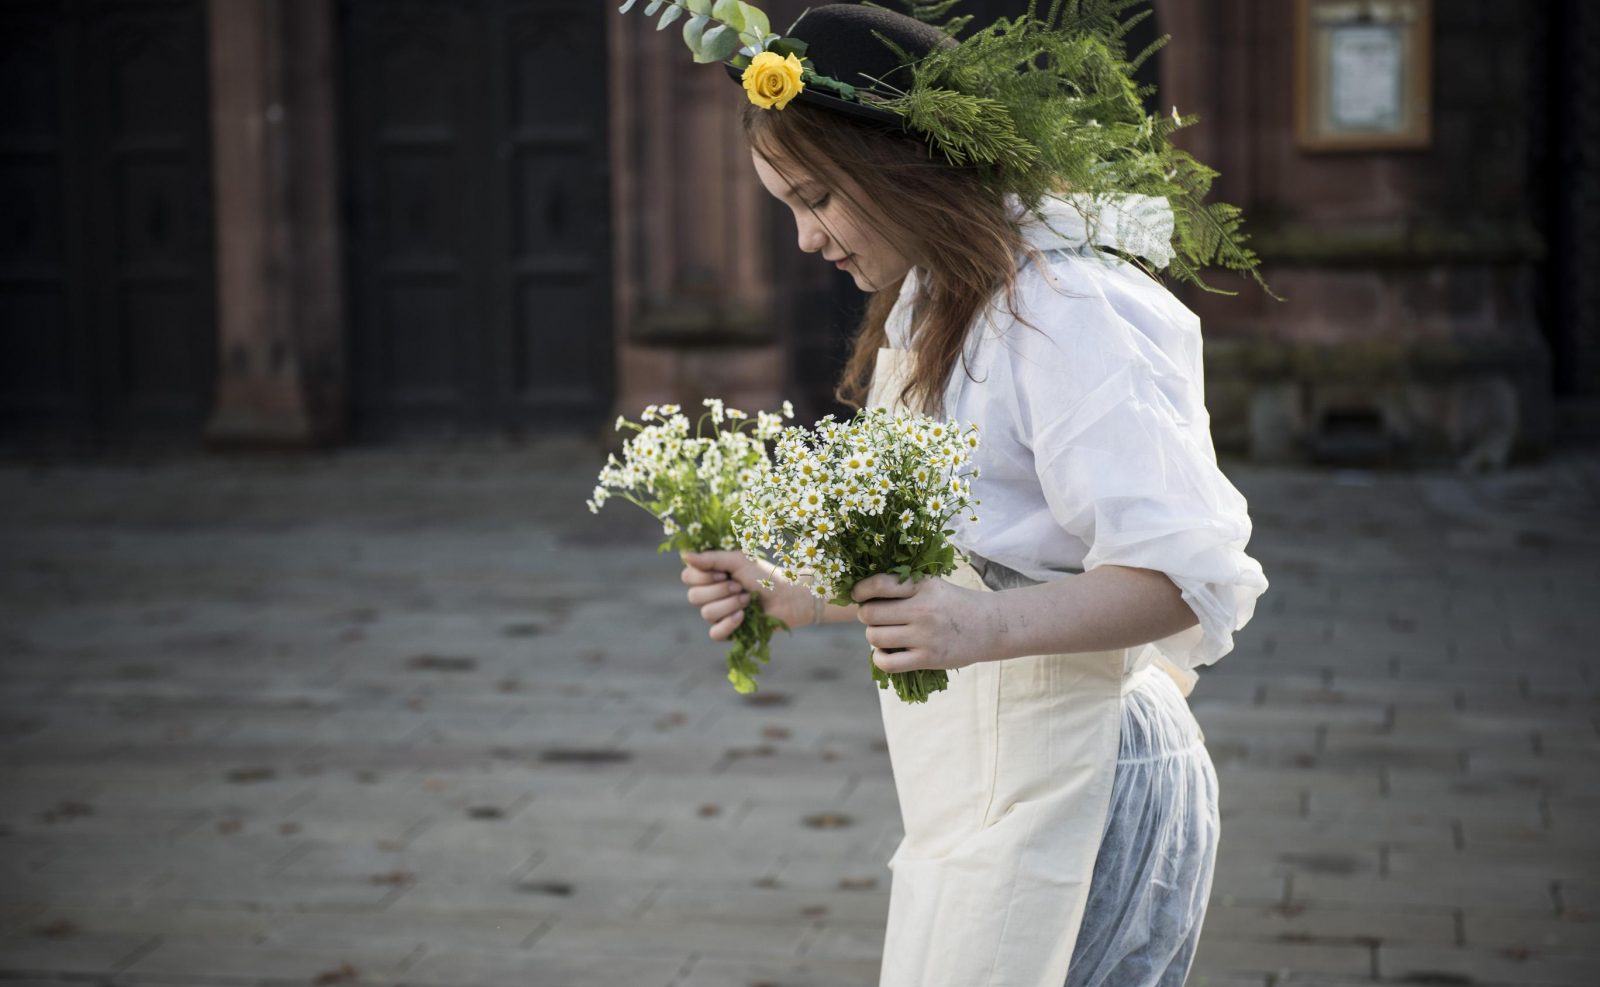 A young person walks in front of a sandstone building wearing white overalls and an apron. They are carrying two big bunches of white flowers and they wear a hat covered in flowers and green ferns.